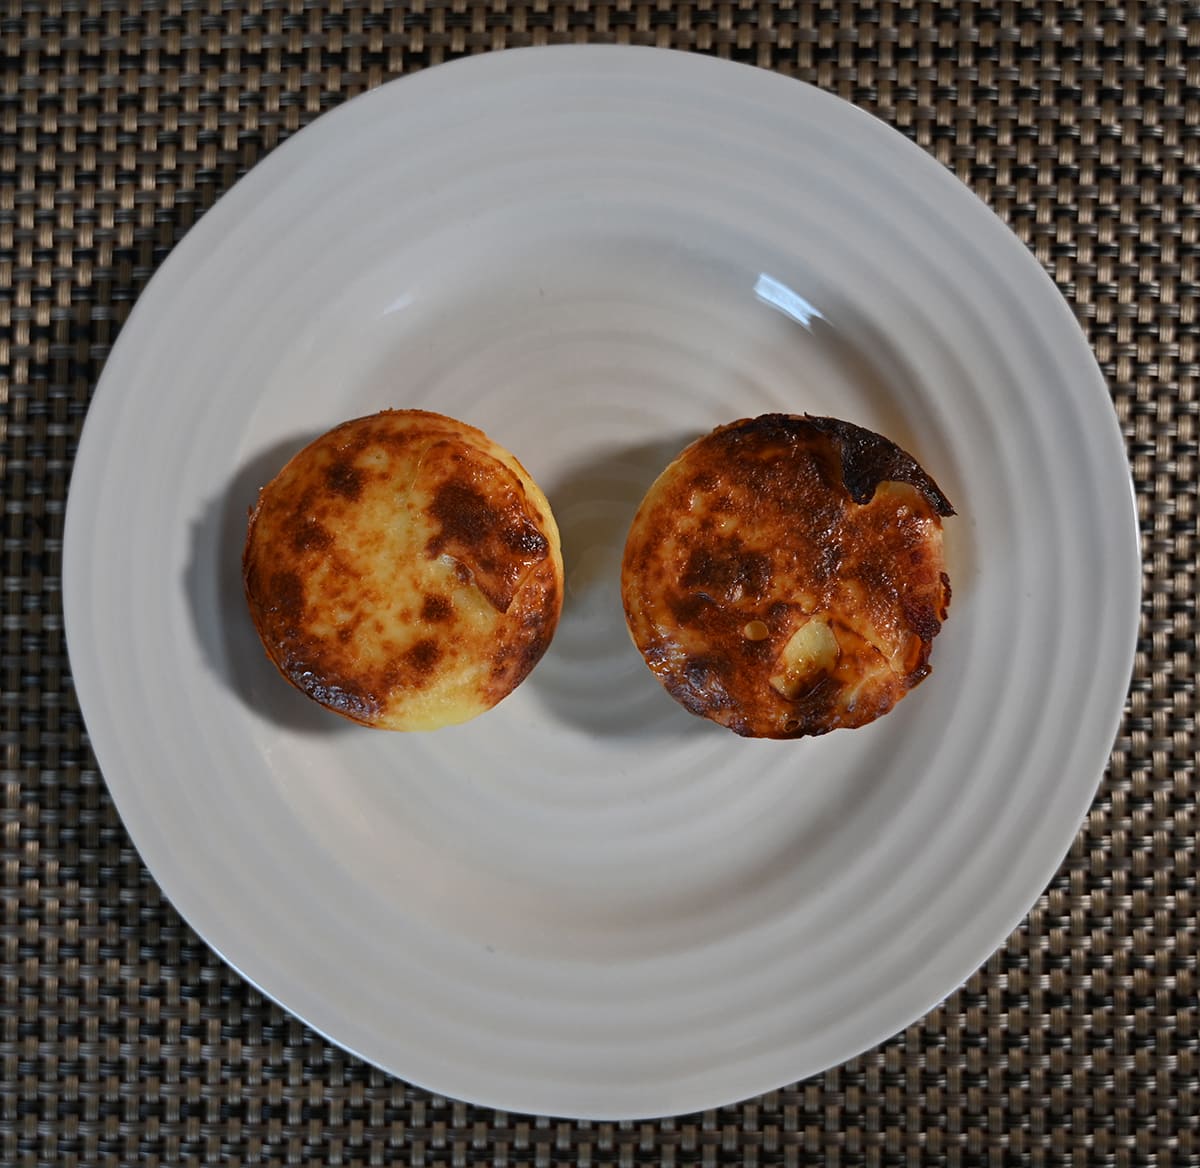 Top down image of two air fried egg bites sitting on a plate.